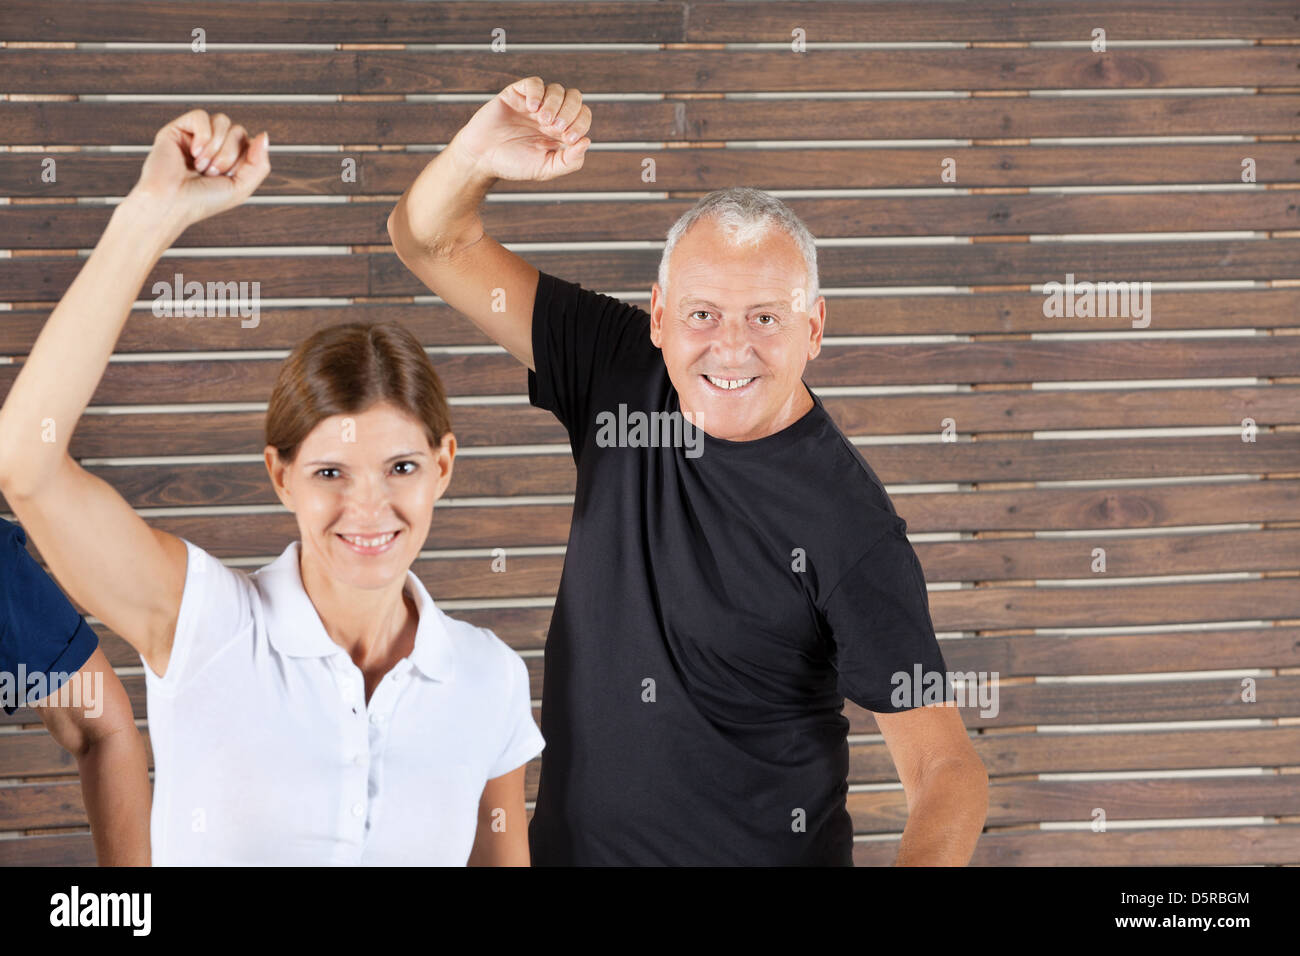 Senior people moving in dancing class in a group Stock Photo